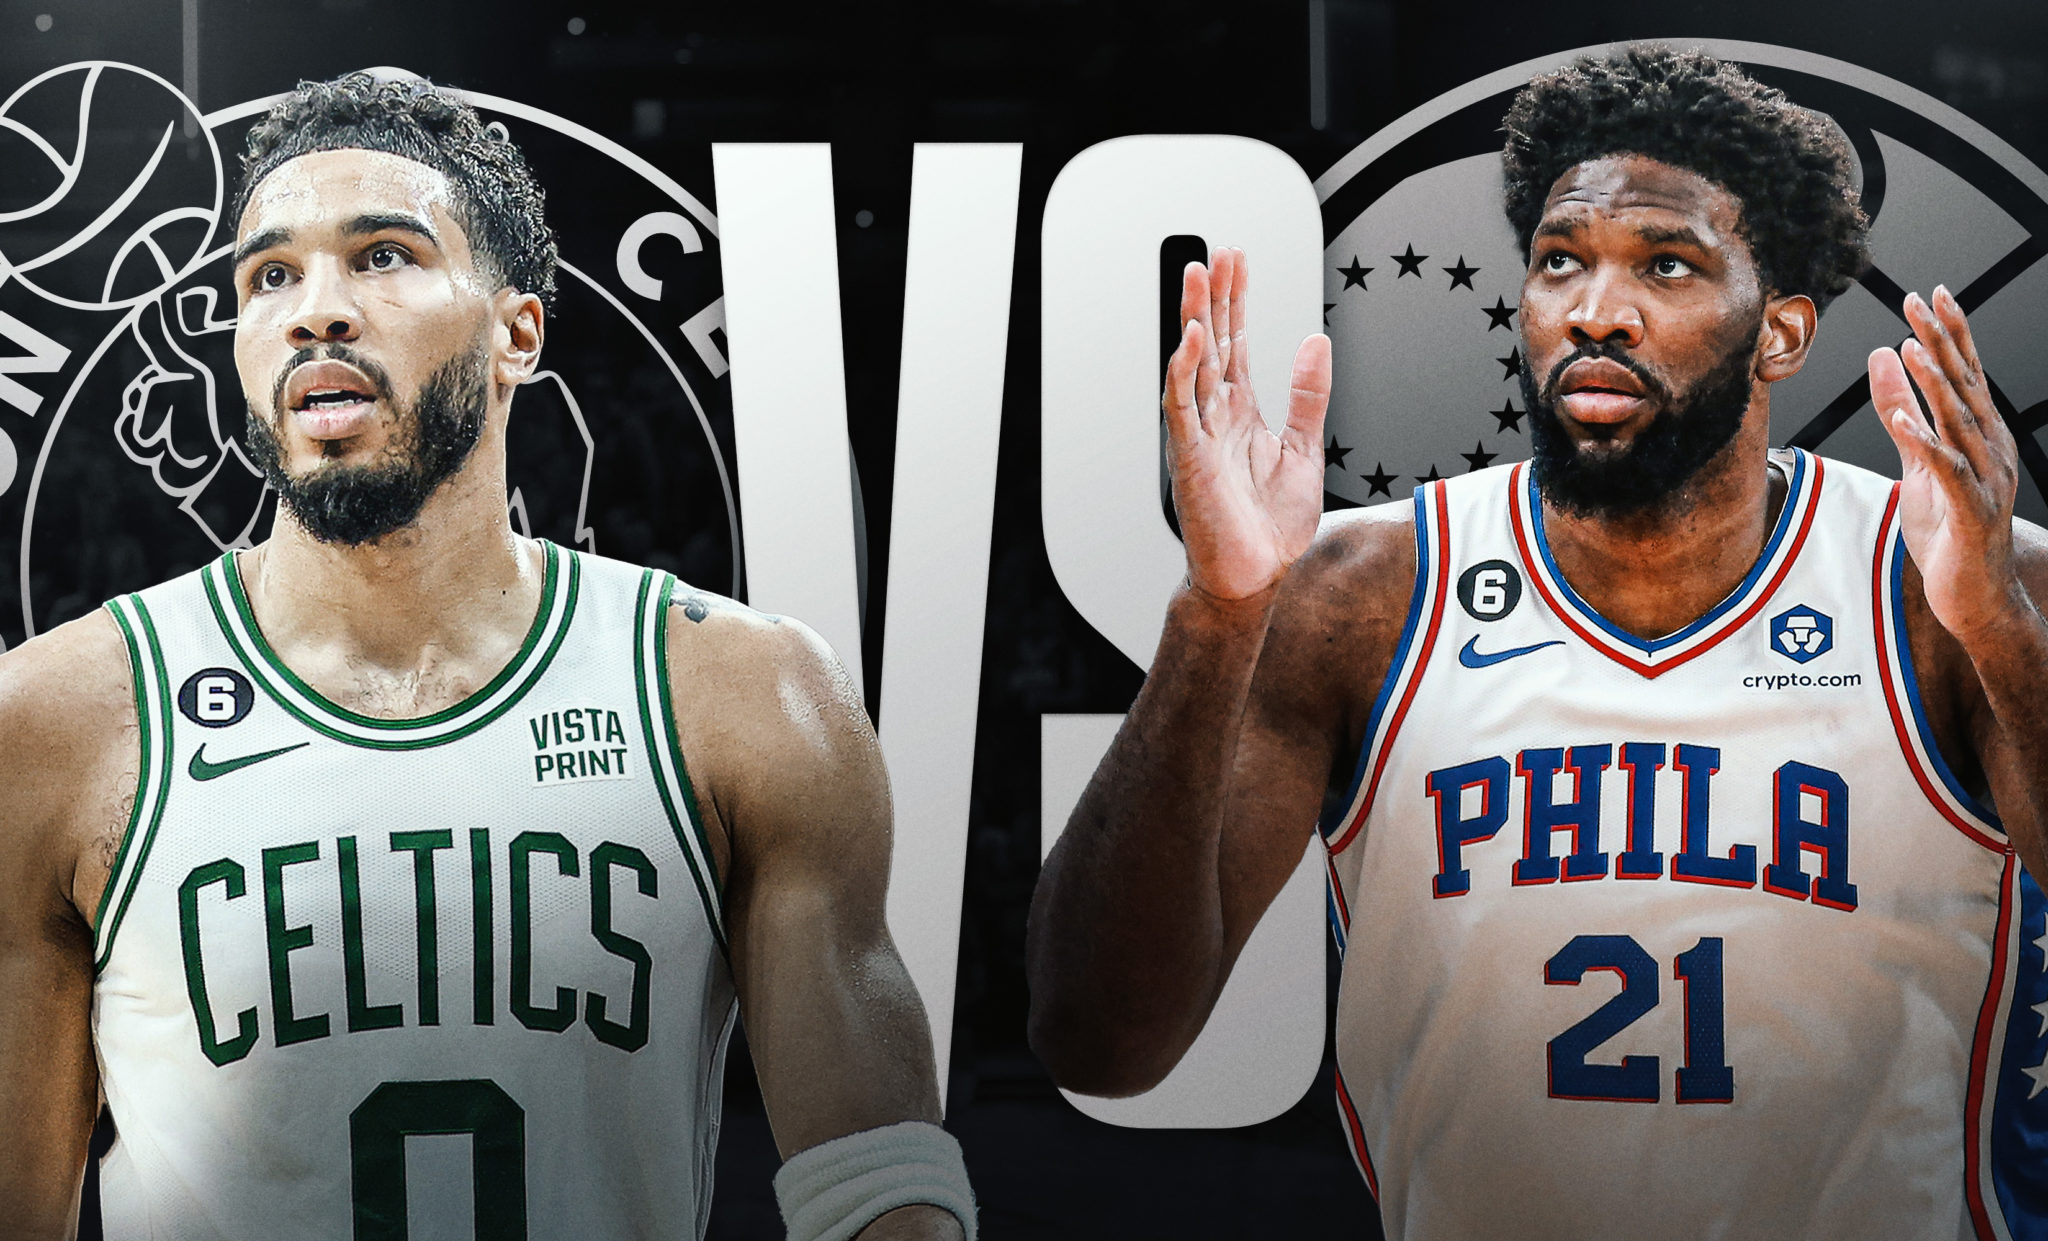 Can The 76ers Advance? 76ers vs. Celtics Game 6 Playoff Preview, Odds & Predictions